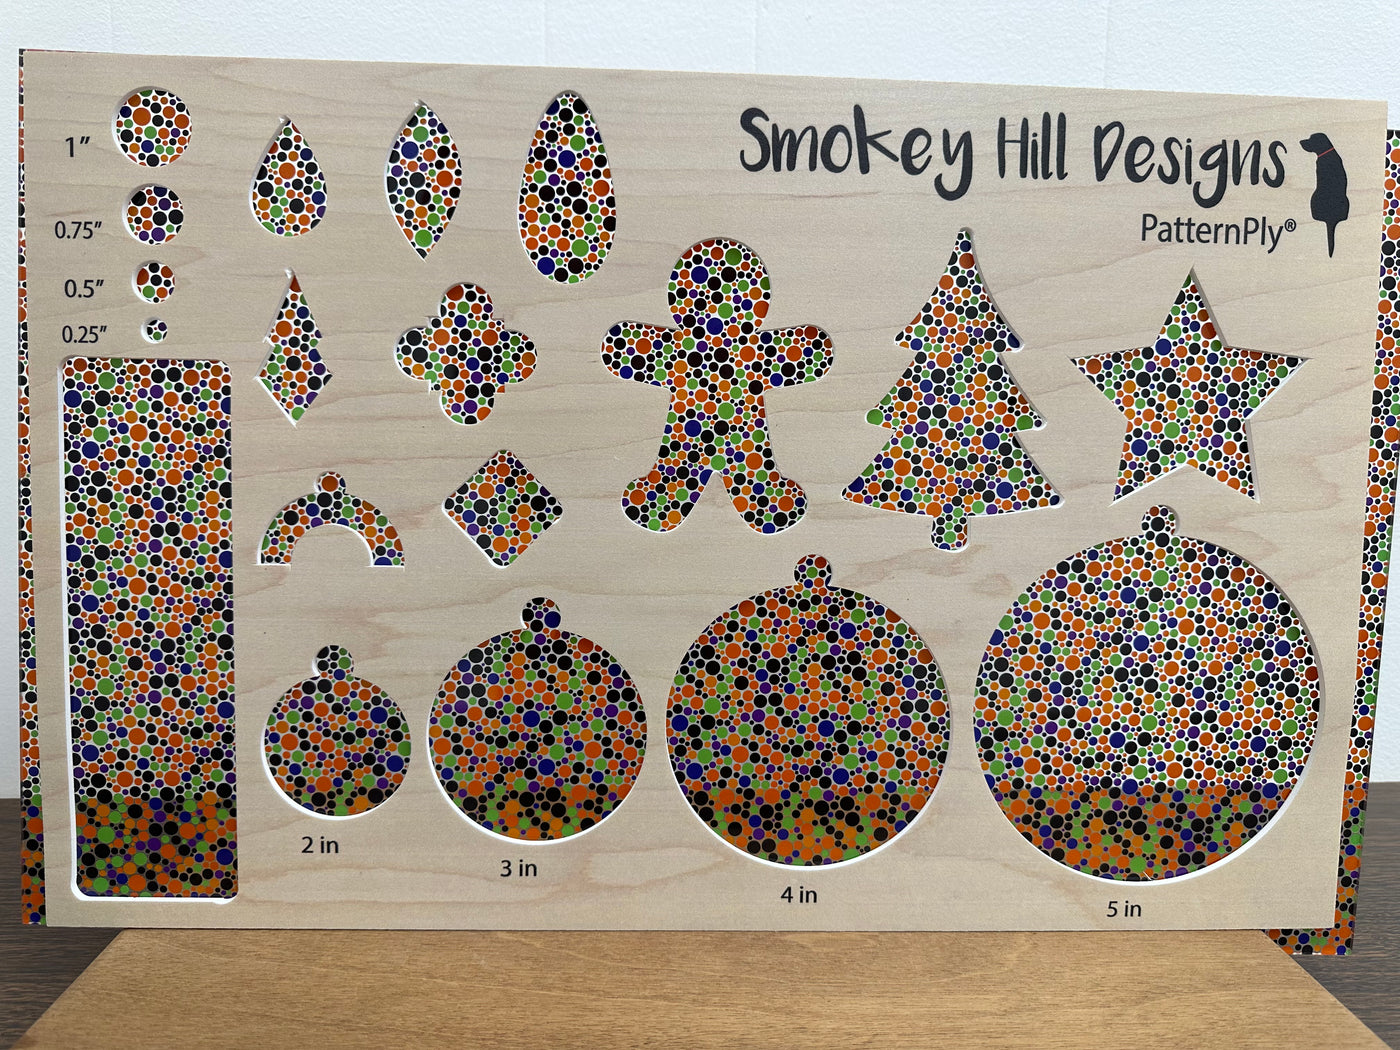 PatternPly® Scattered Halloween Multi Bubbles